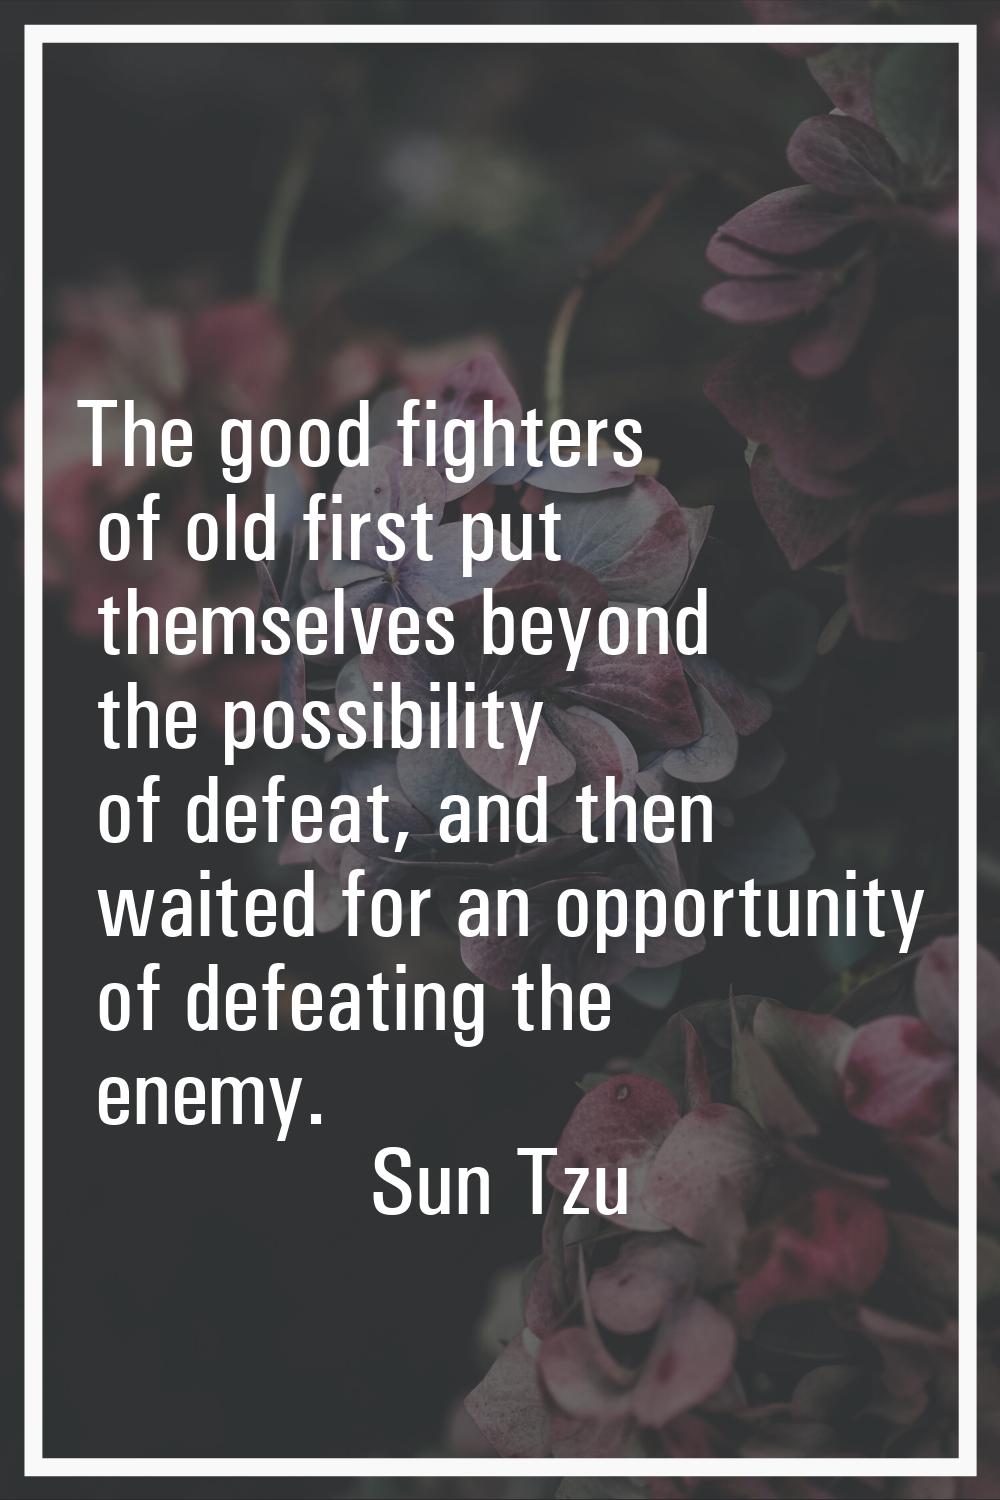 The good fighters of old first put themselves beyond the possibility of defeat, and then waited for